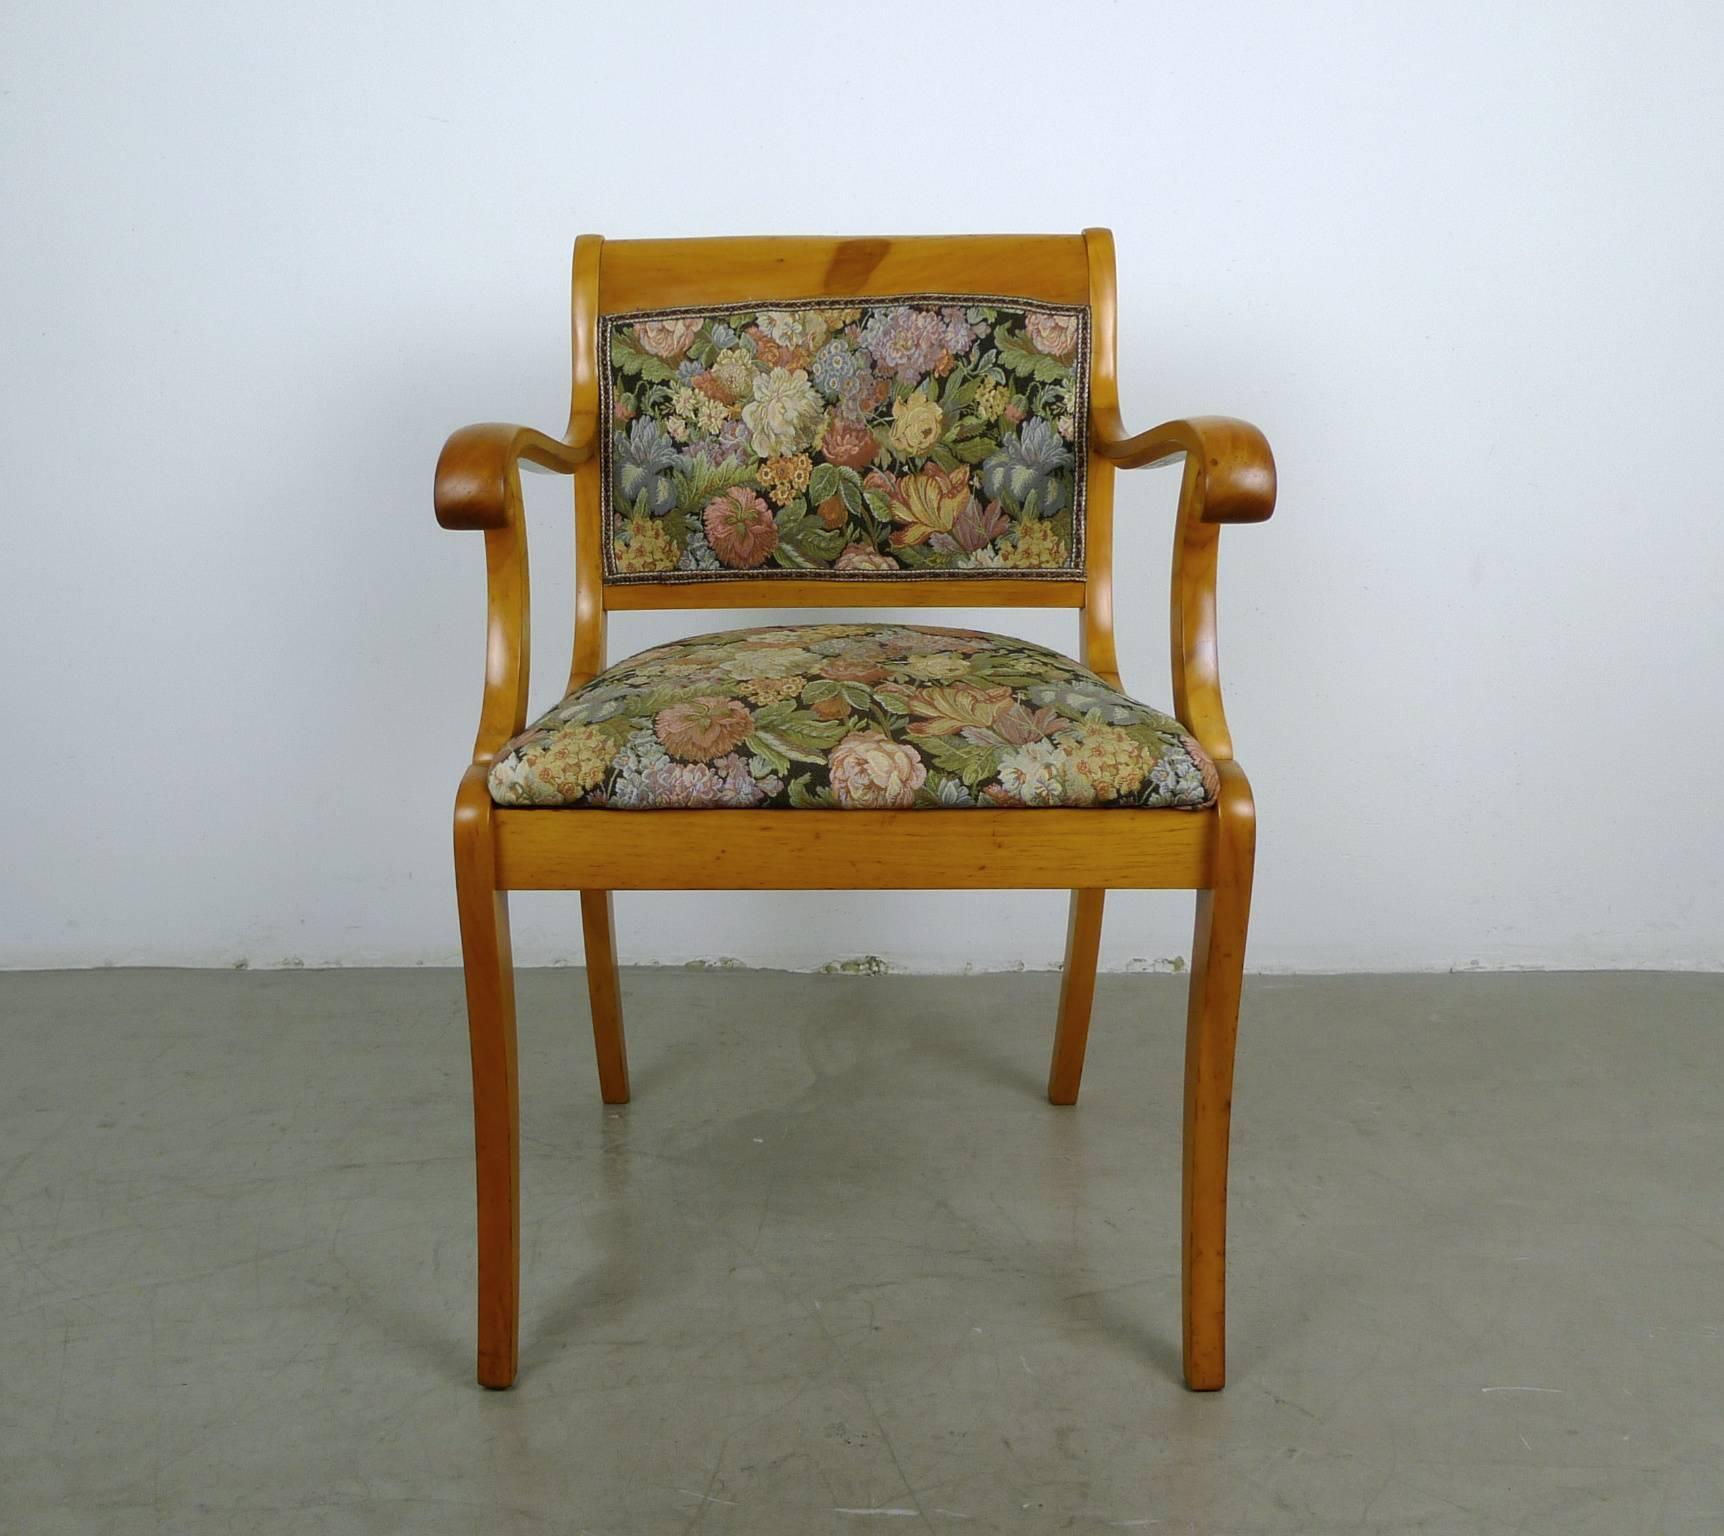 Armchair with solid cherry frame and colored fabric cover with plant motifs. The backrest is covered on both sides with fabric. Curved armrests close at the front in a snail shape.
This armchair was made circa 1900 in Southern Germany in